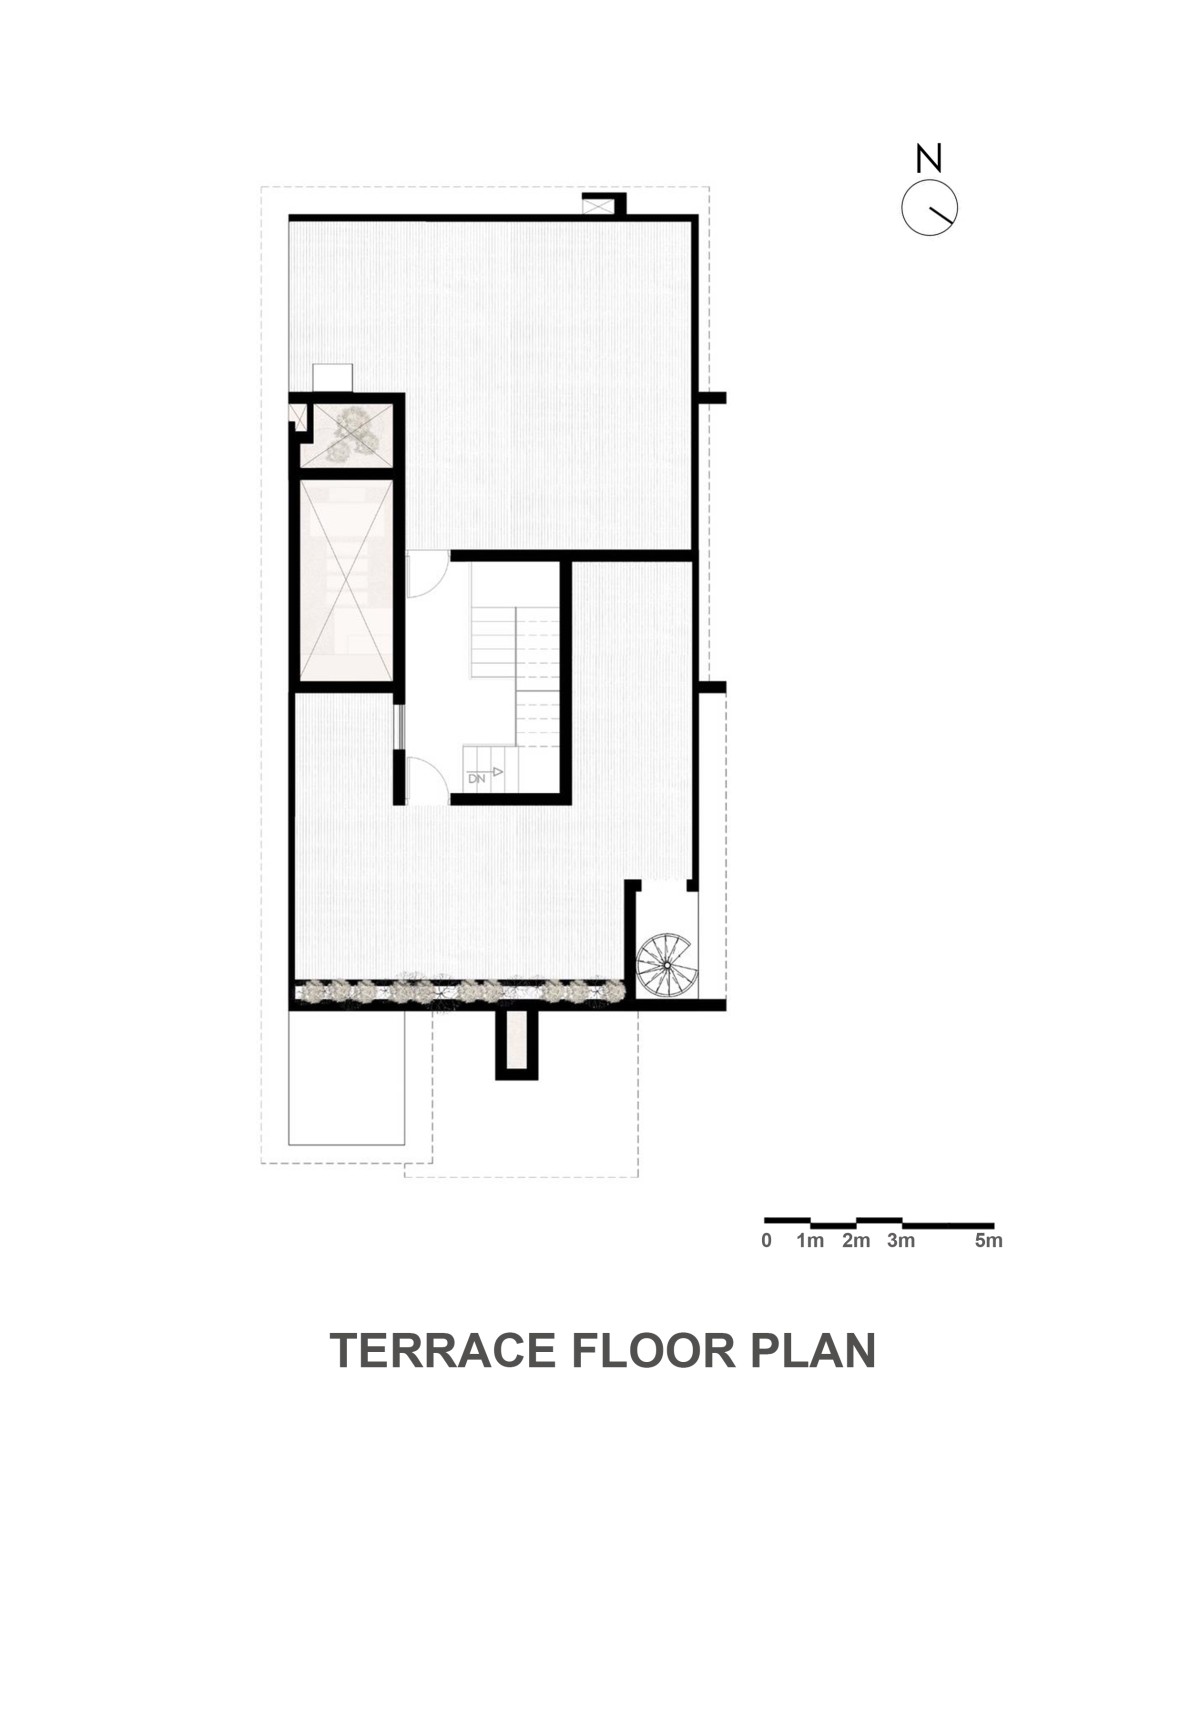 Terrace Floor Plan of Carving a COURT OF QUIETUDE in a Bustling Cityscape by Mudbricks Architects